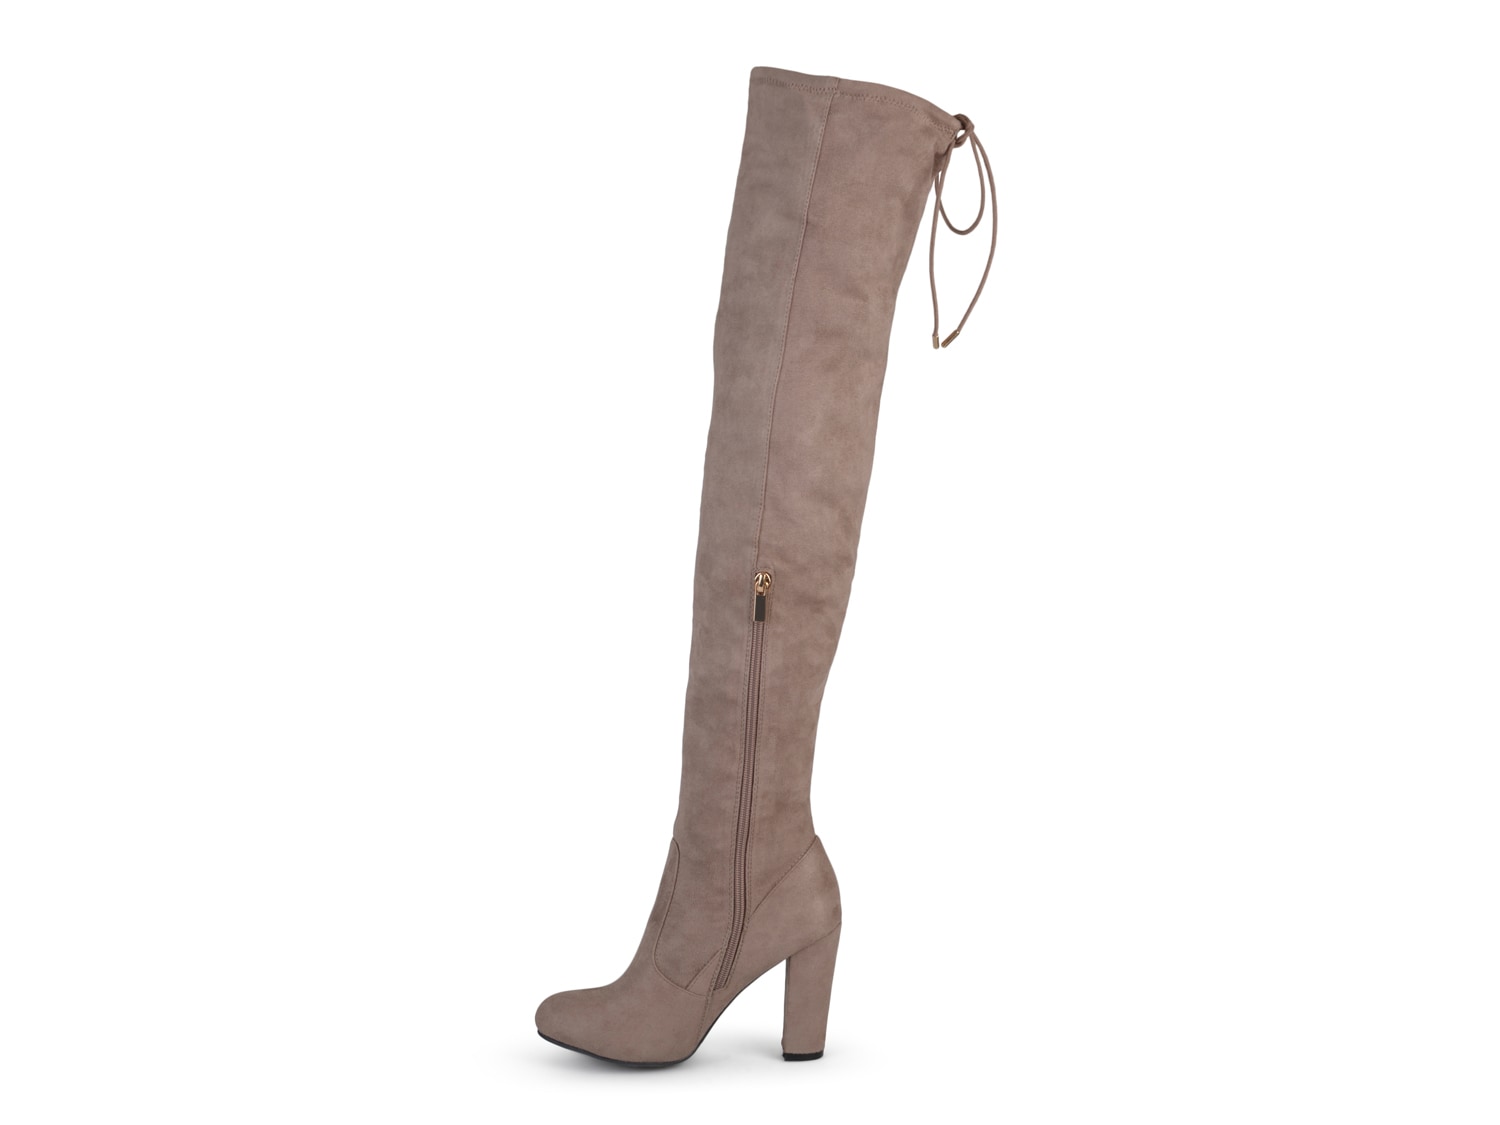 journee collection maya wide calf thigh high boot